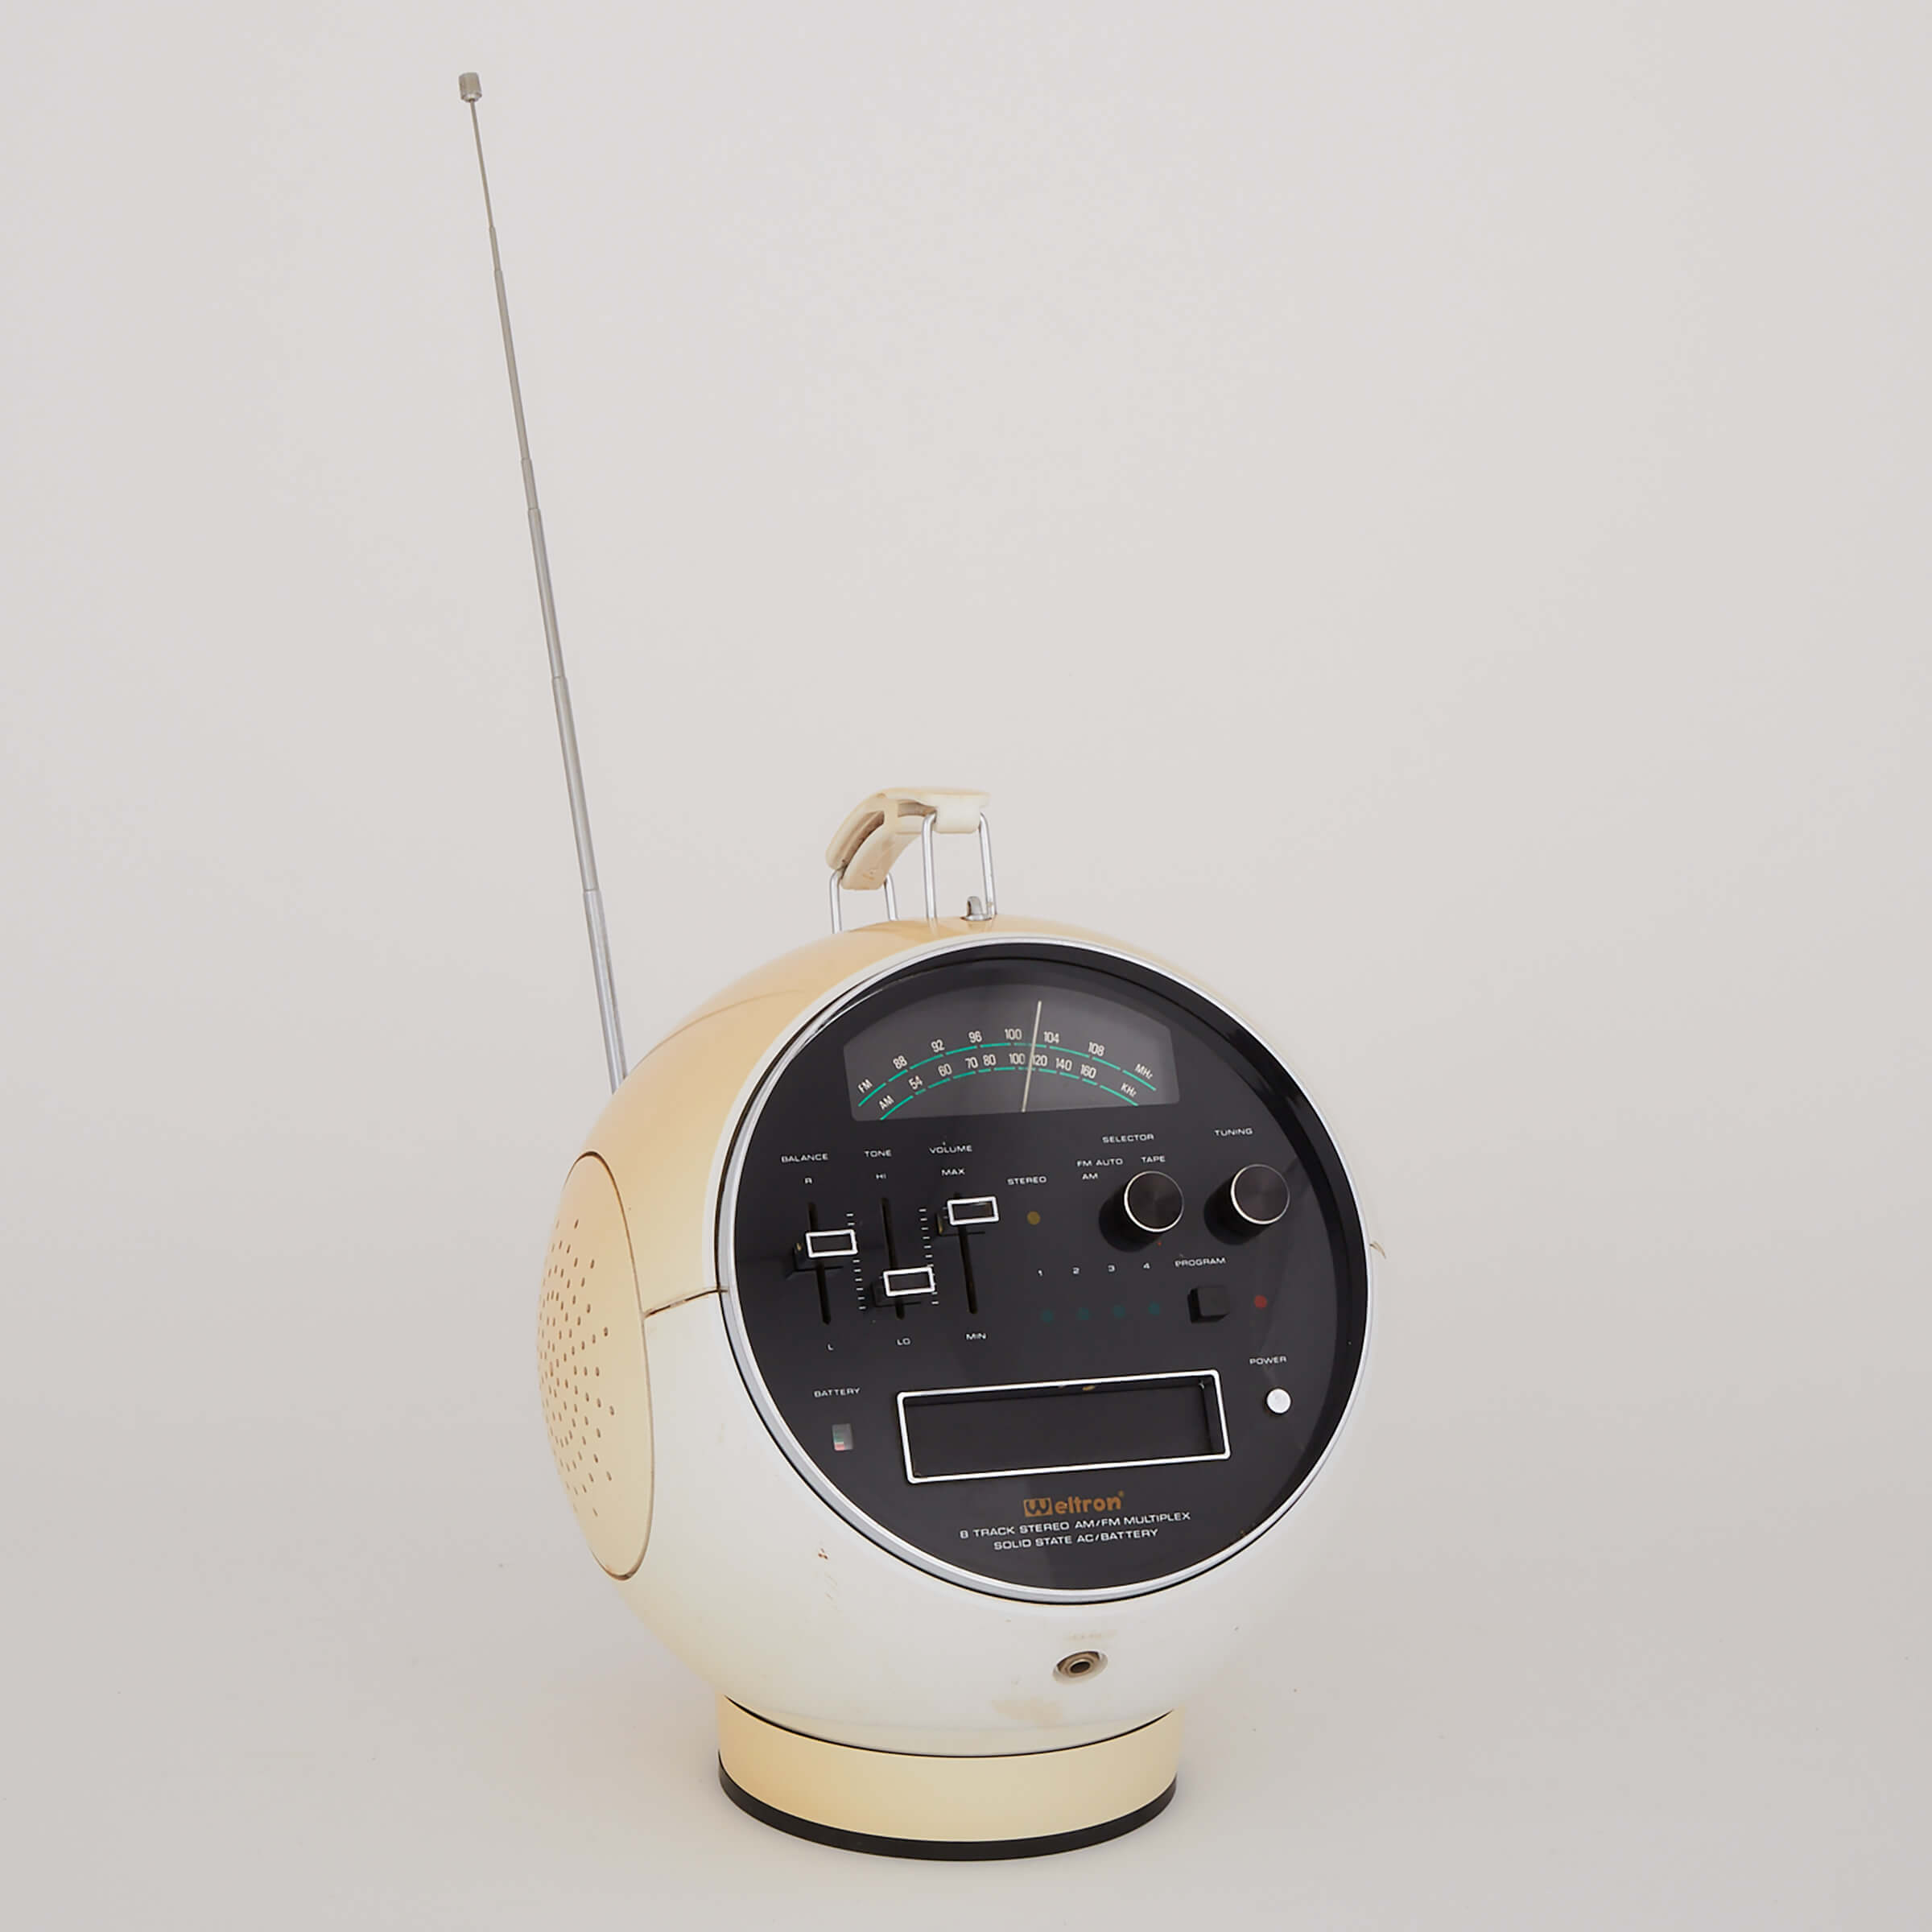 Weltron Prinz Sound SM8 ‘Space Ball’ AM/FM Radio and 8-Track Cassette Player, c.1970, height 12 in —